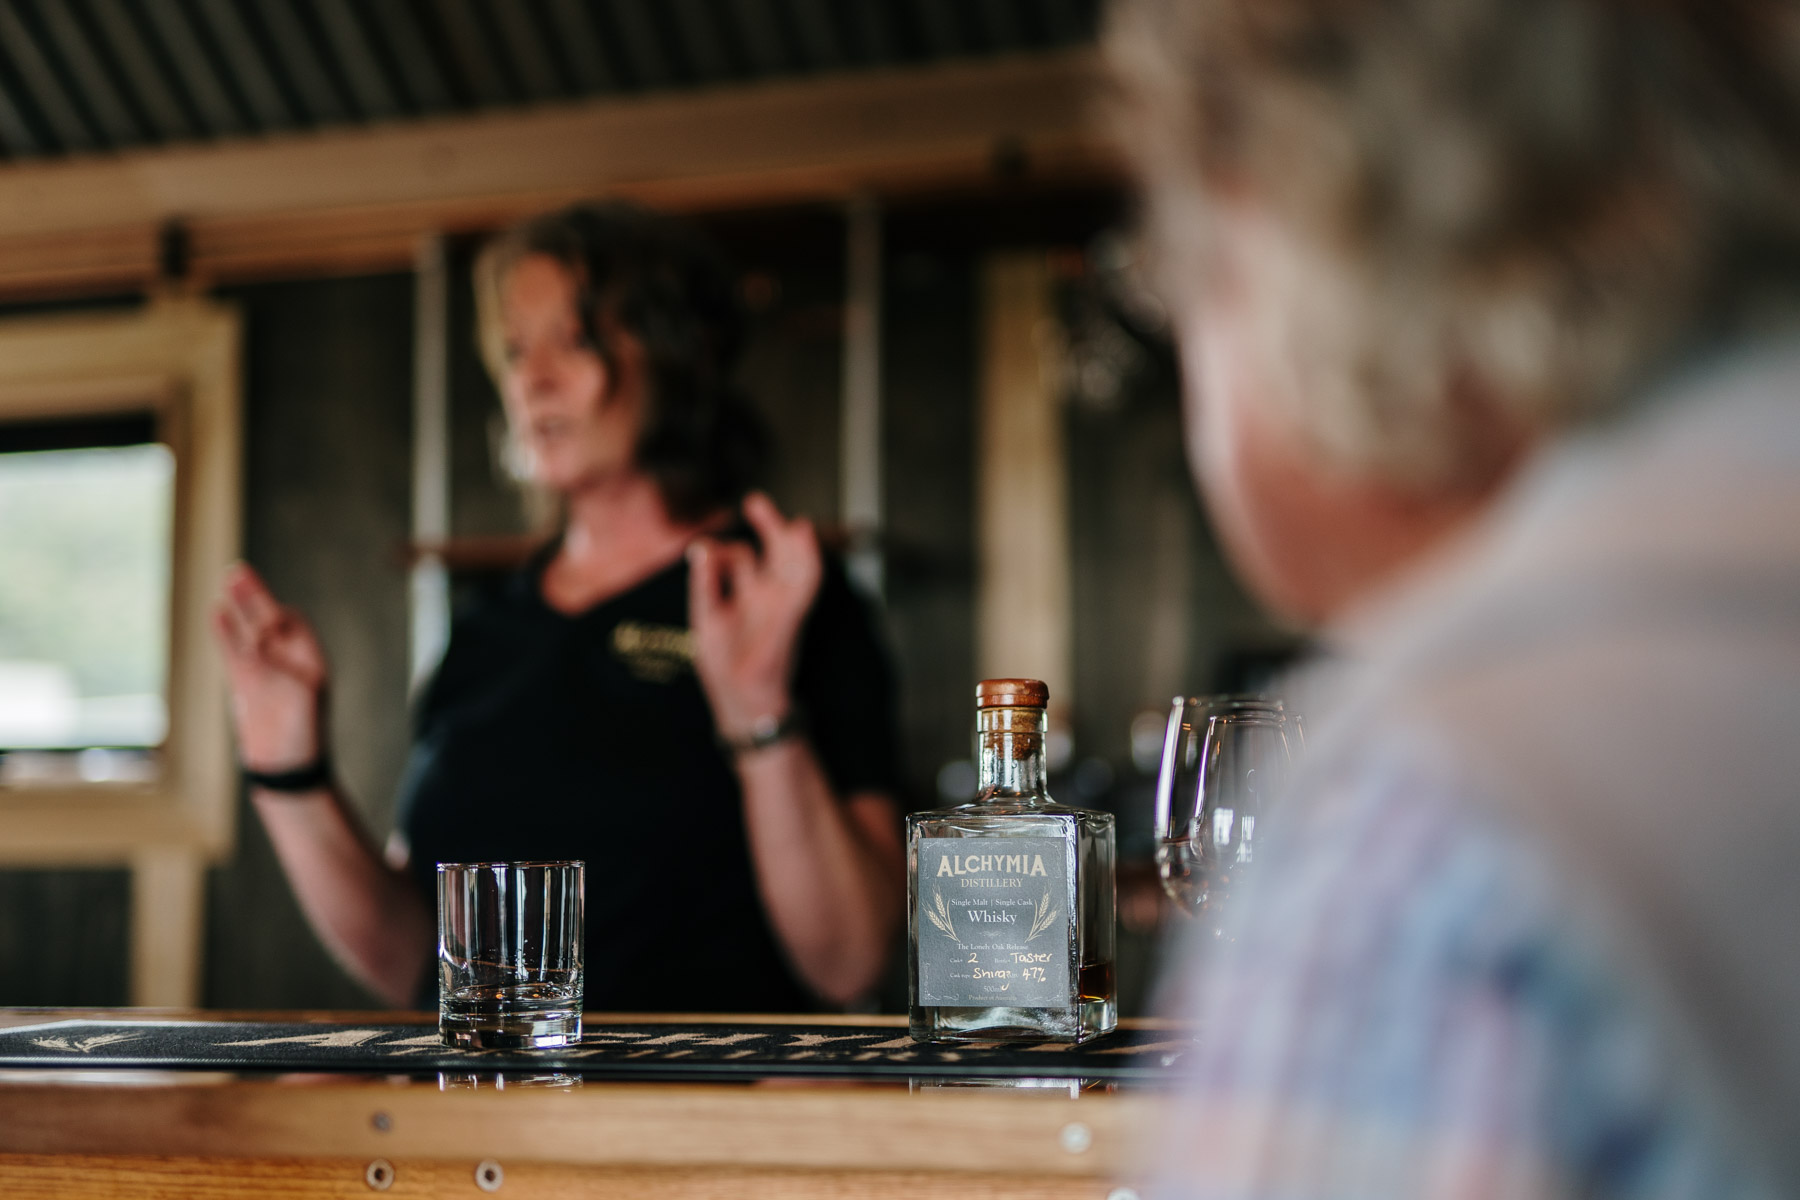 Coastline Tours Tasmania in Collaboration with Alchymia Gin Distillery: Uncover the essence of North West Tasmania with a twist of artisanal gin. Join guided tours that blend the region's beauty with the craftsmanship of Alchymia Gin Distillery.